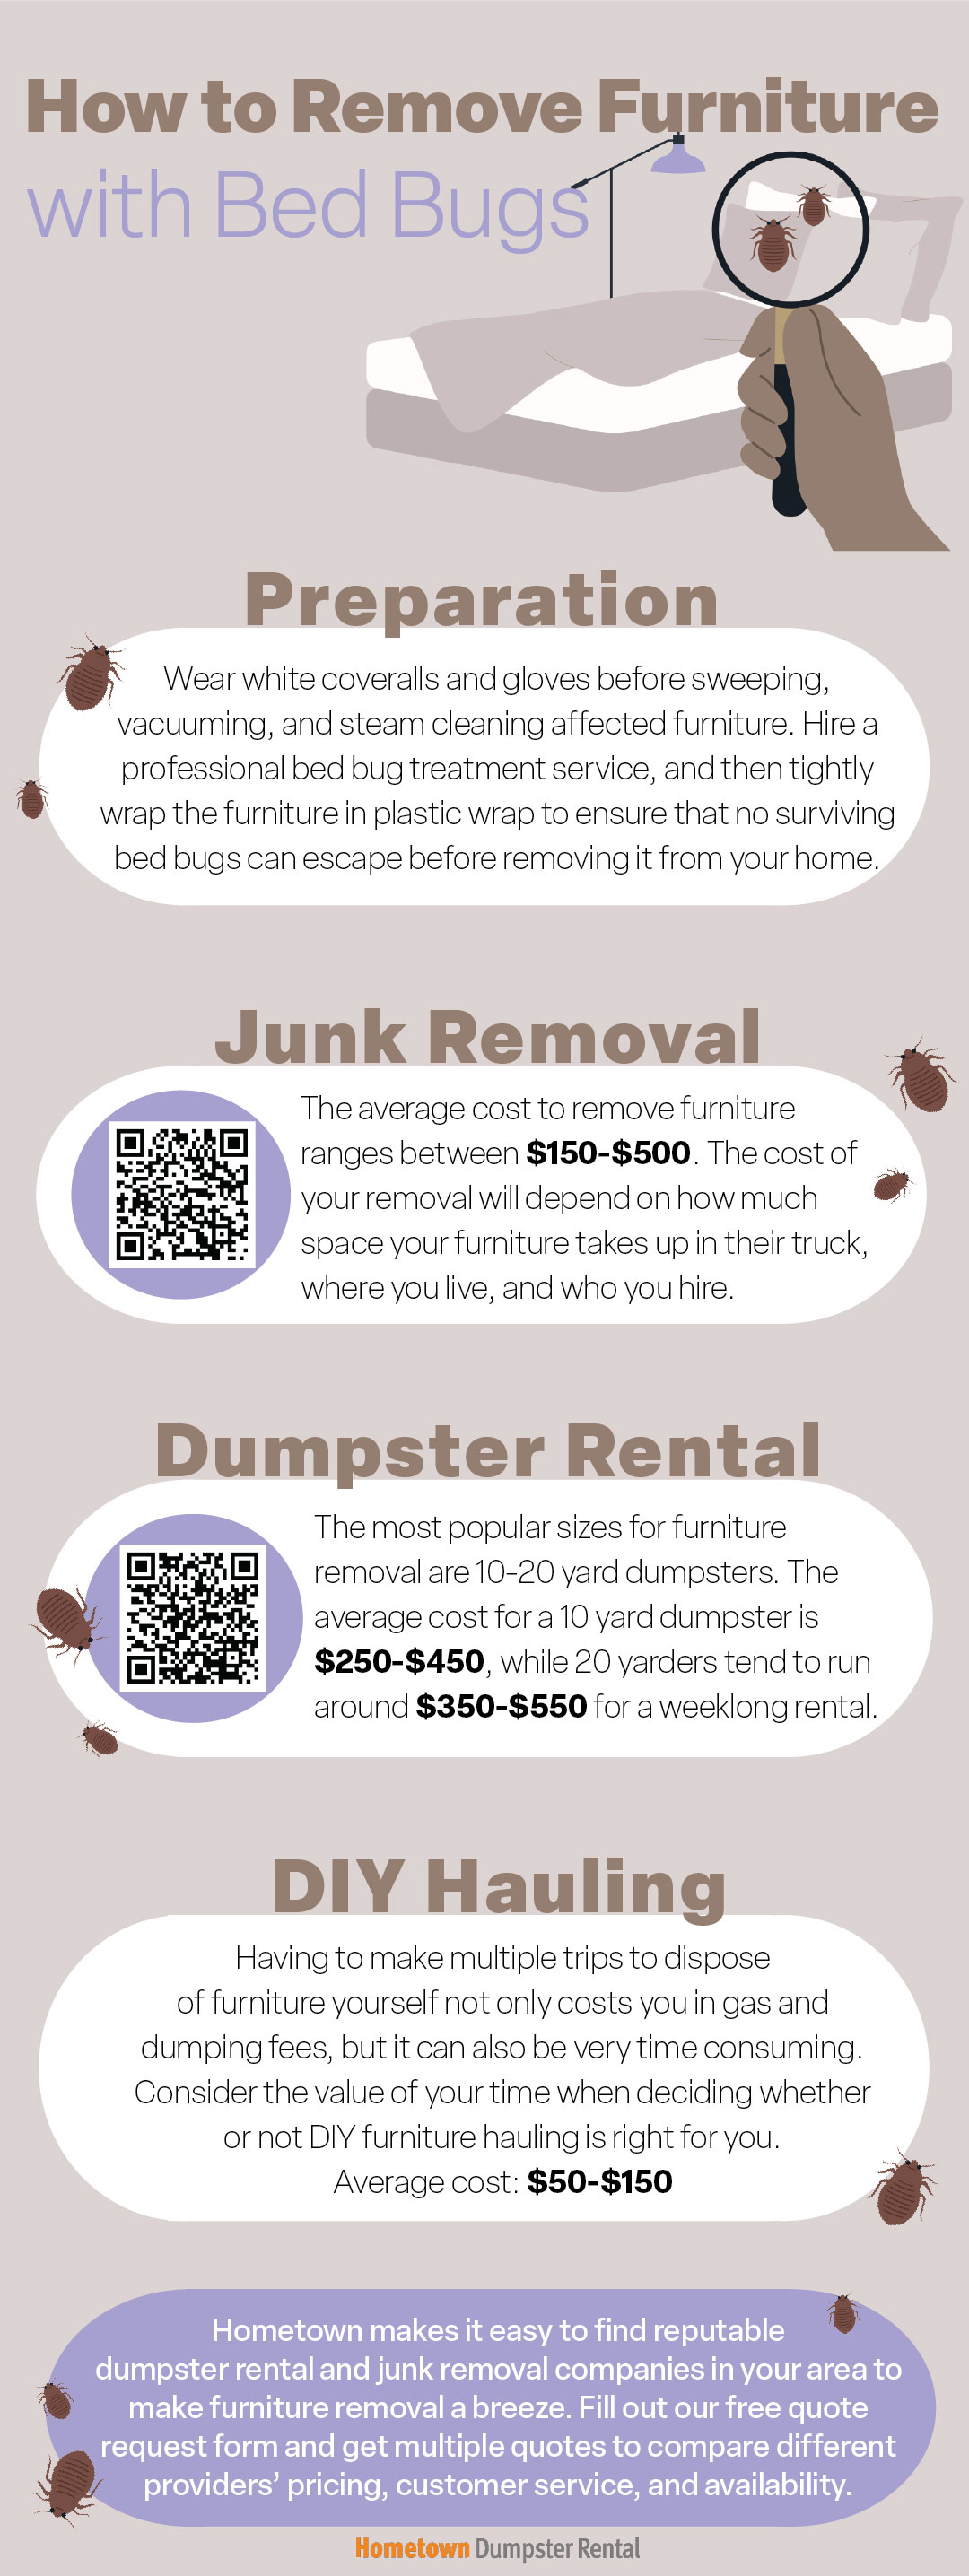 How to Remove Furniture with Bed Bugs Infographic